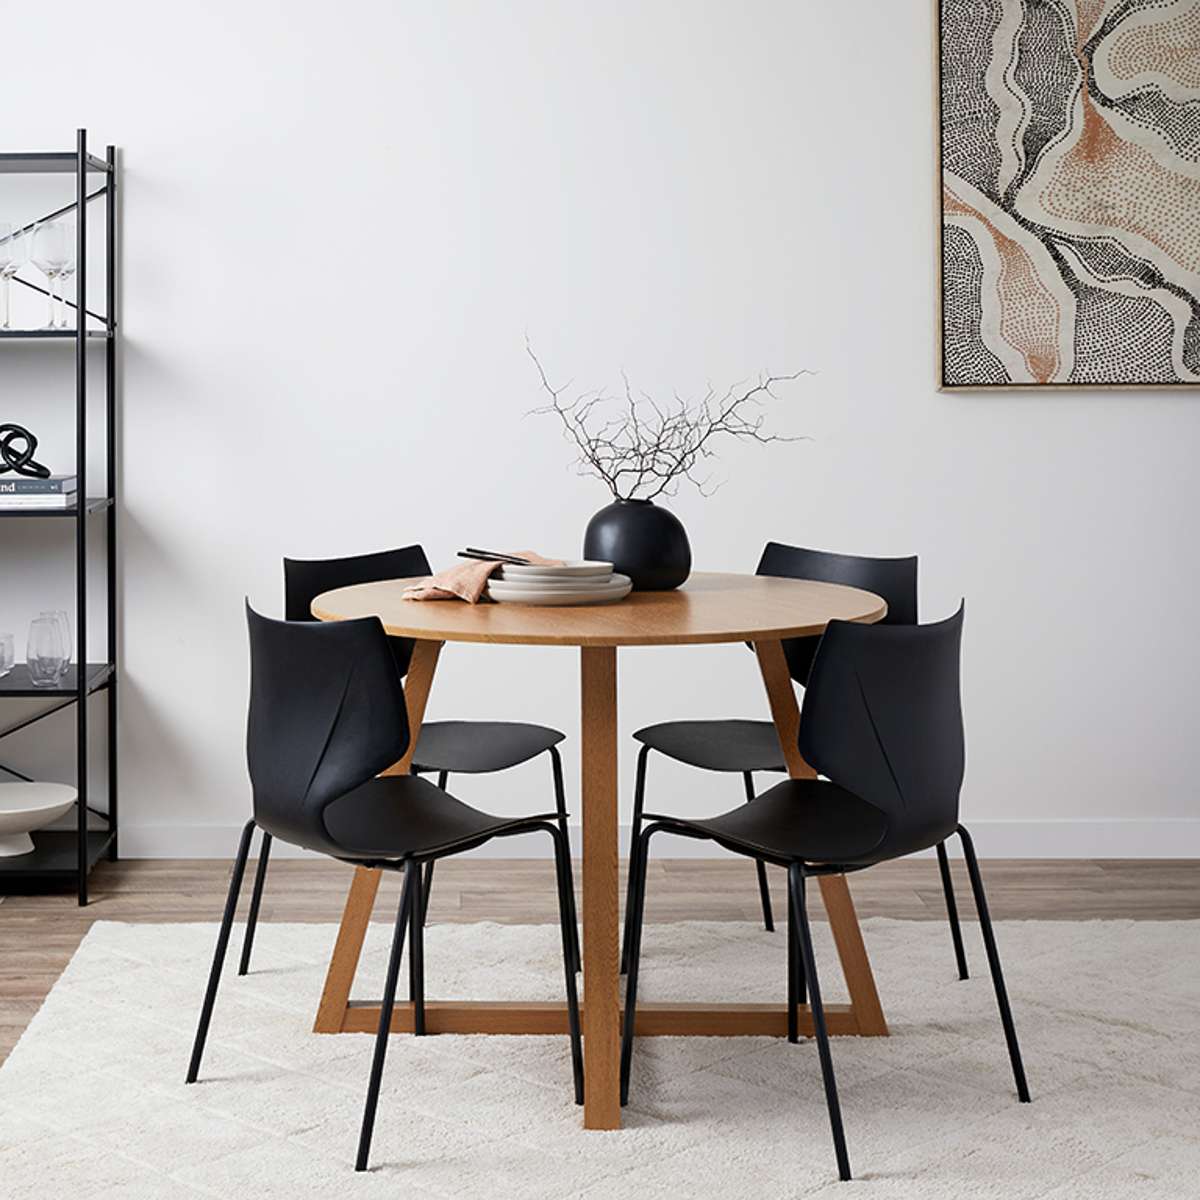 Avalon 4 Seater Dining Table - Natural